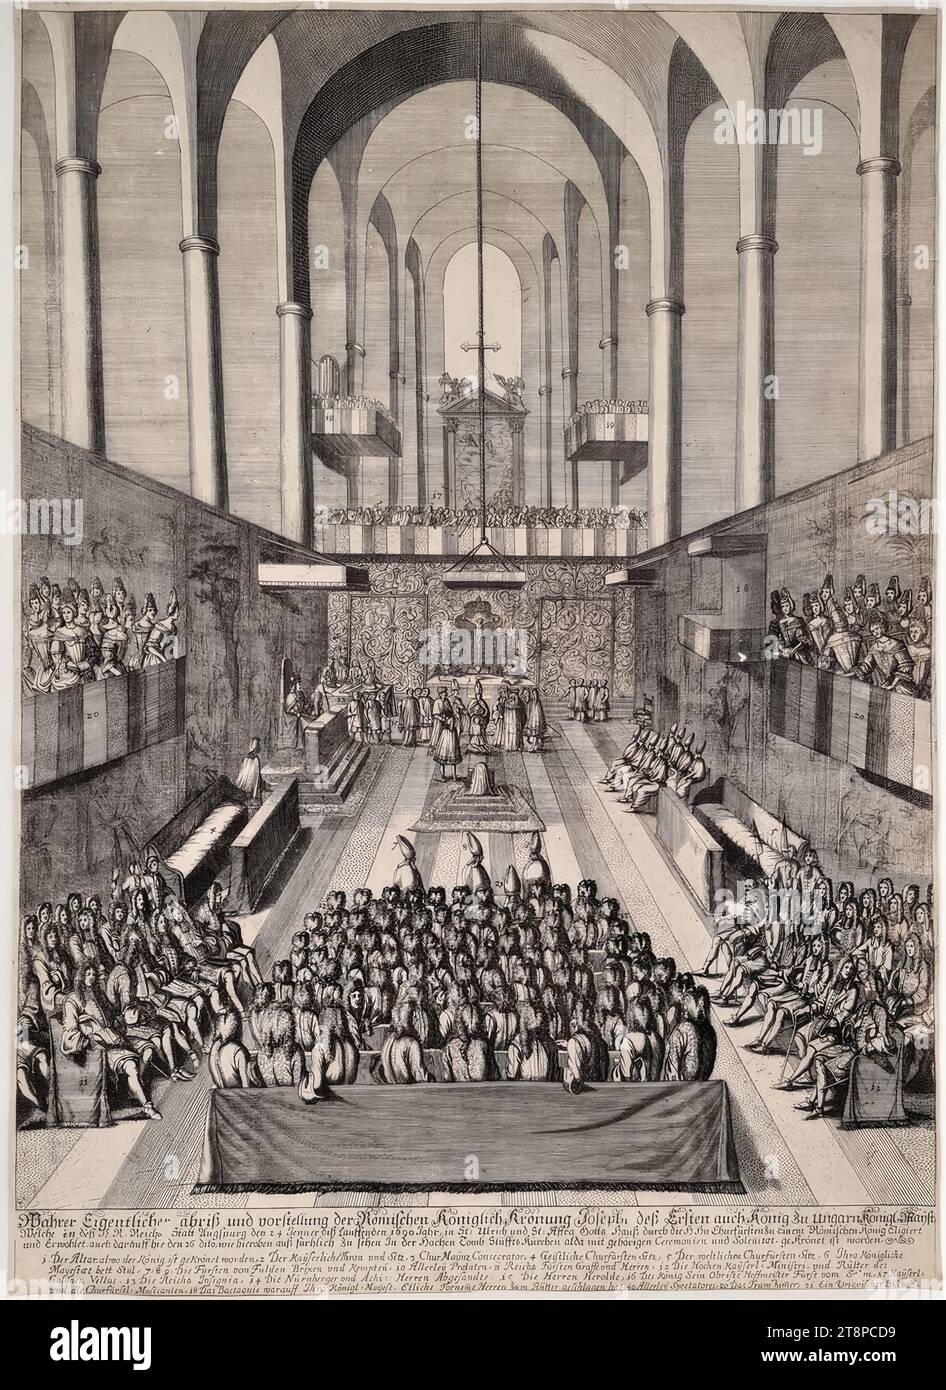 Coronation of Archduke Joseph as Roman King on January 26, 1690 in the Church of St. Ulrich and St. Afra in Augsburg, anonymous, around 1690/95, copper engraving on paper, sheet: 55.4 × 40 cm, [bottom] legend 1-21: '1. The altar [...] 21 A Hungarian bishop Stock Photo